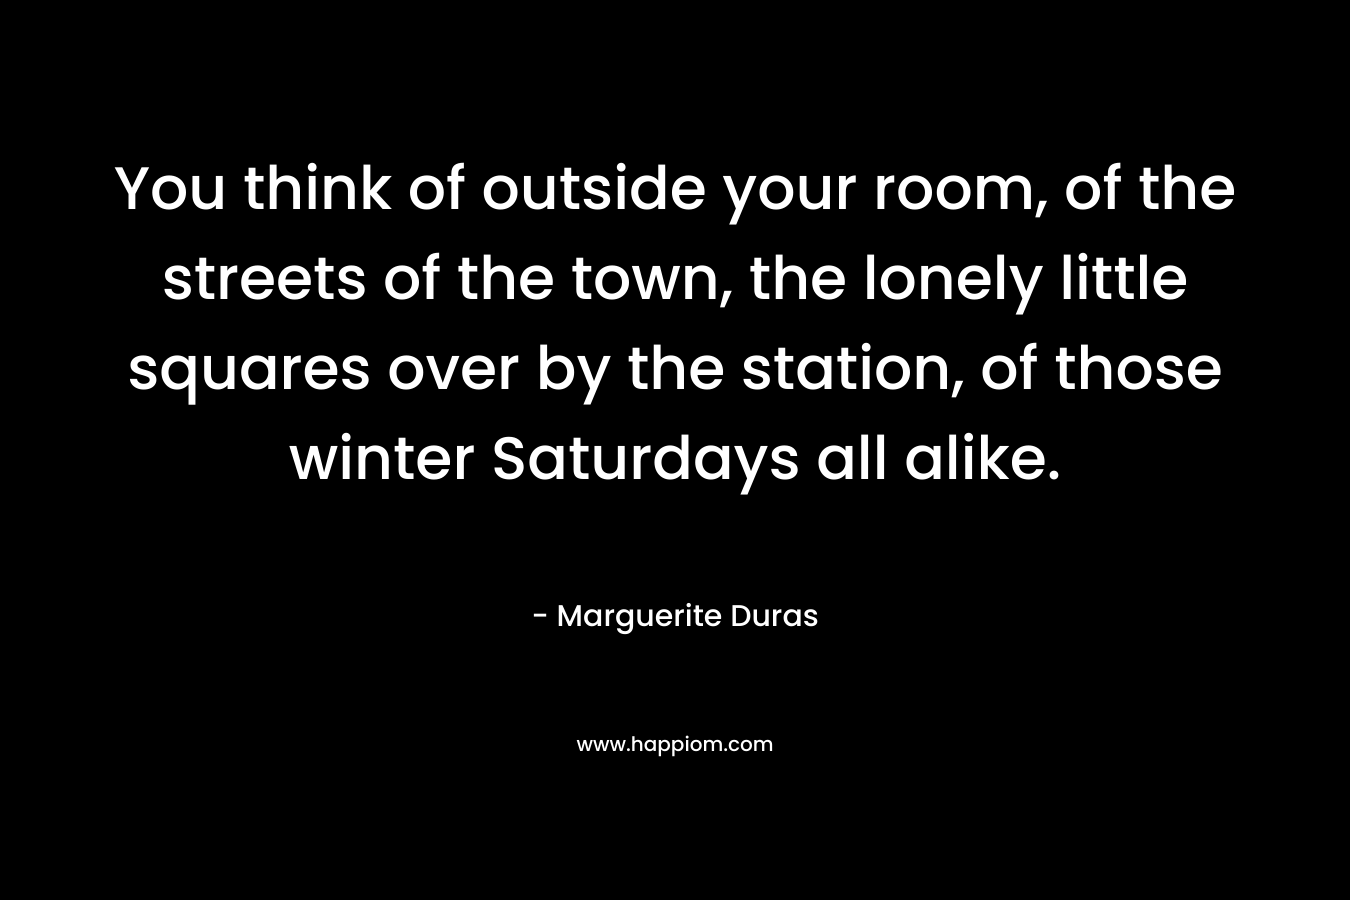 You think of outside your room, of the streets of the town, the lonely little squares over by the station, of those winter Saturdays all alike.